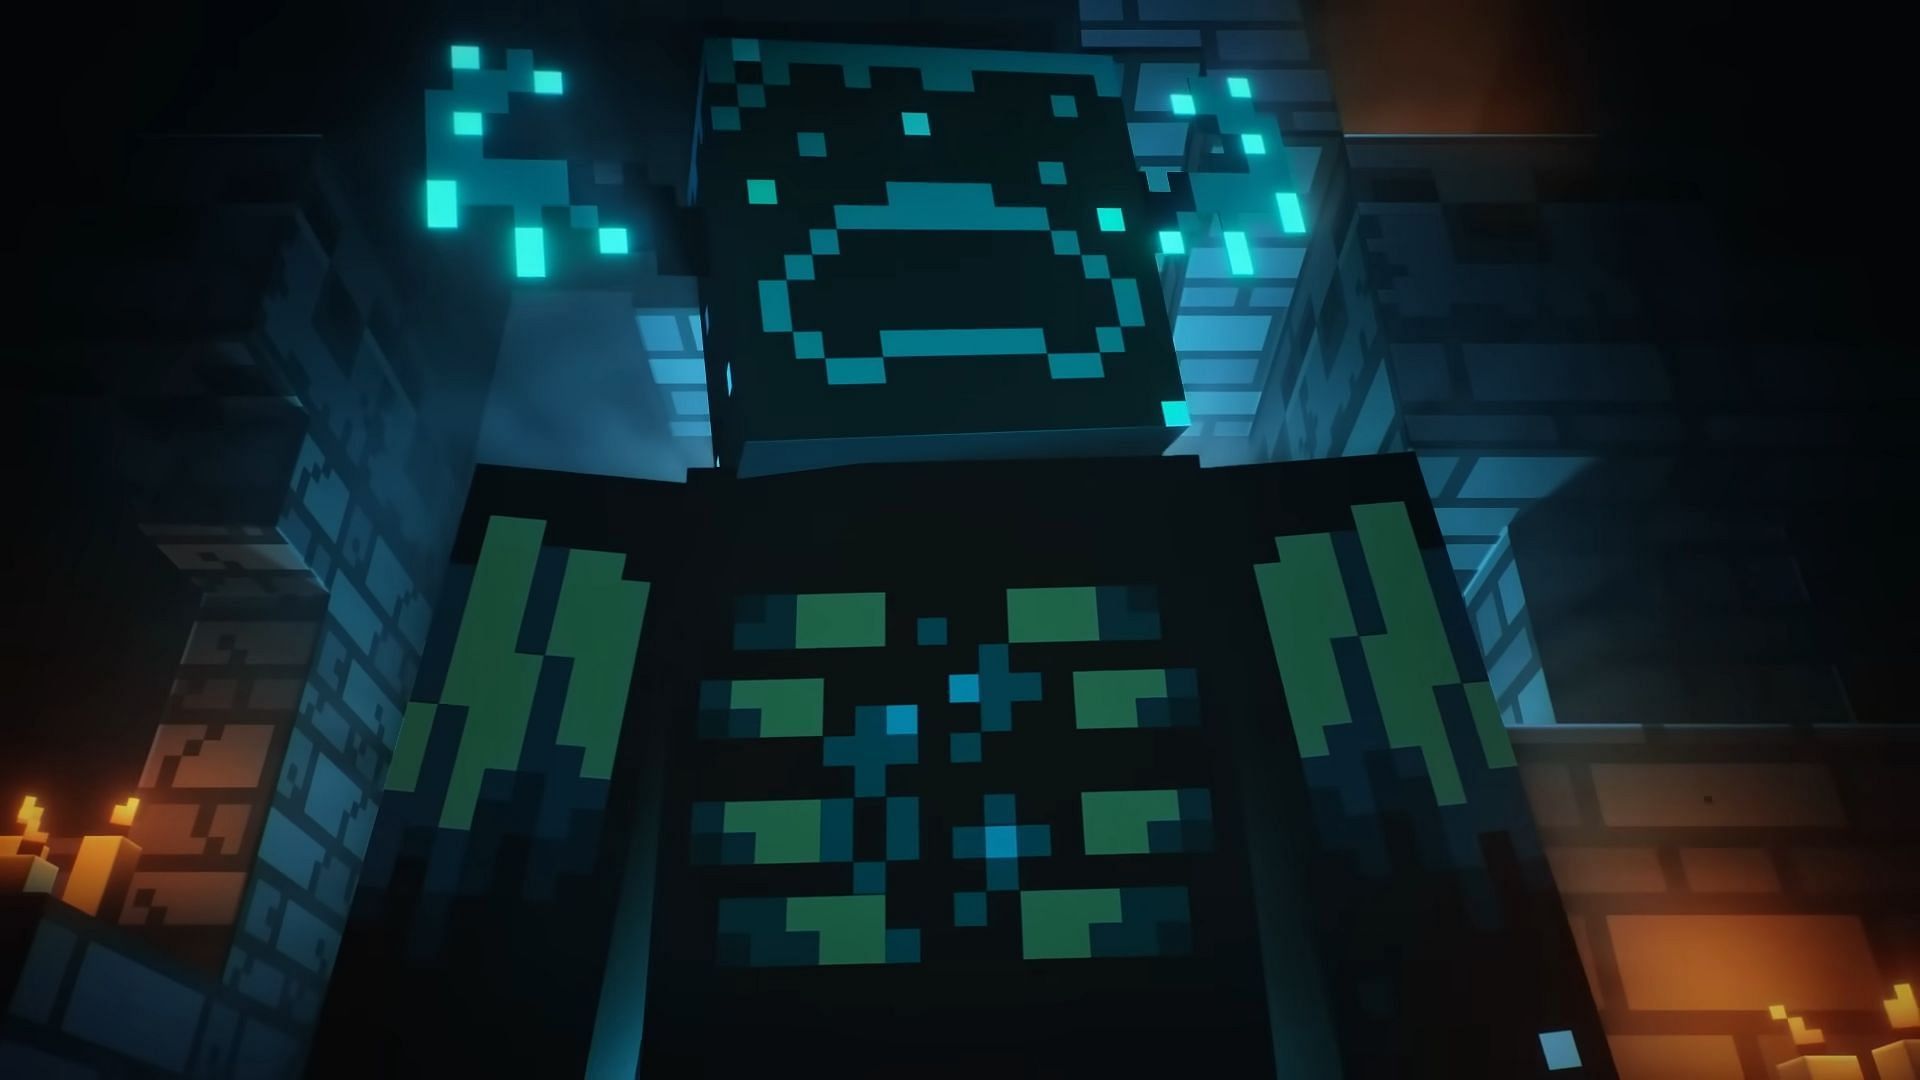 The Warden is one of the most recognizable mobs in Minecraft (Image via Mojang)